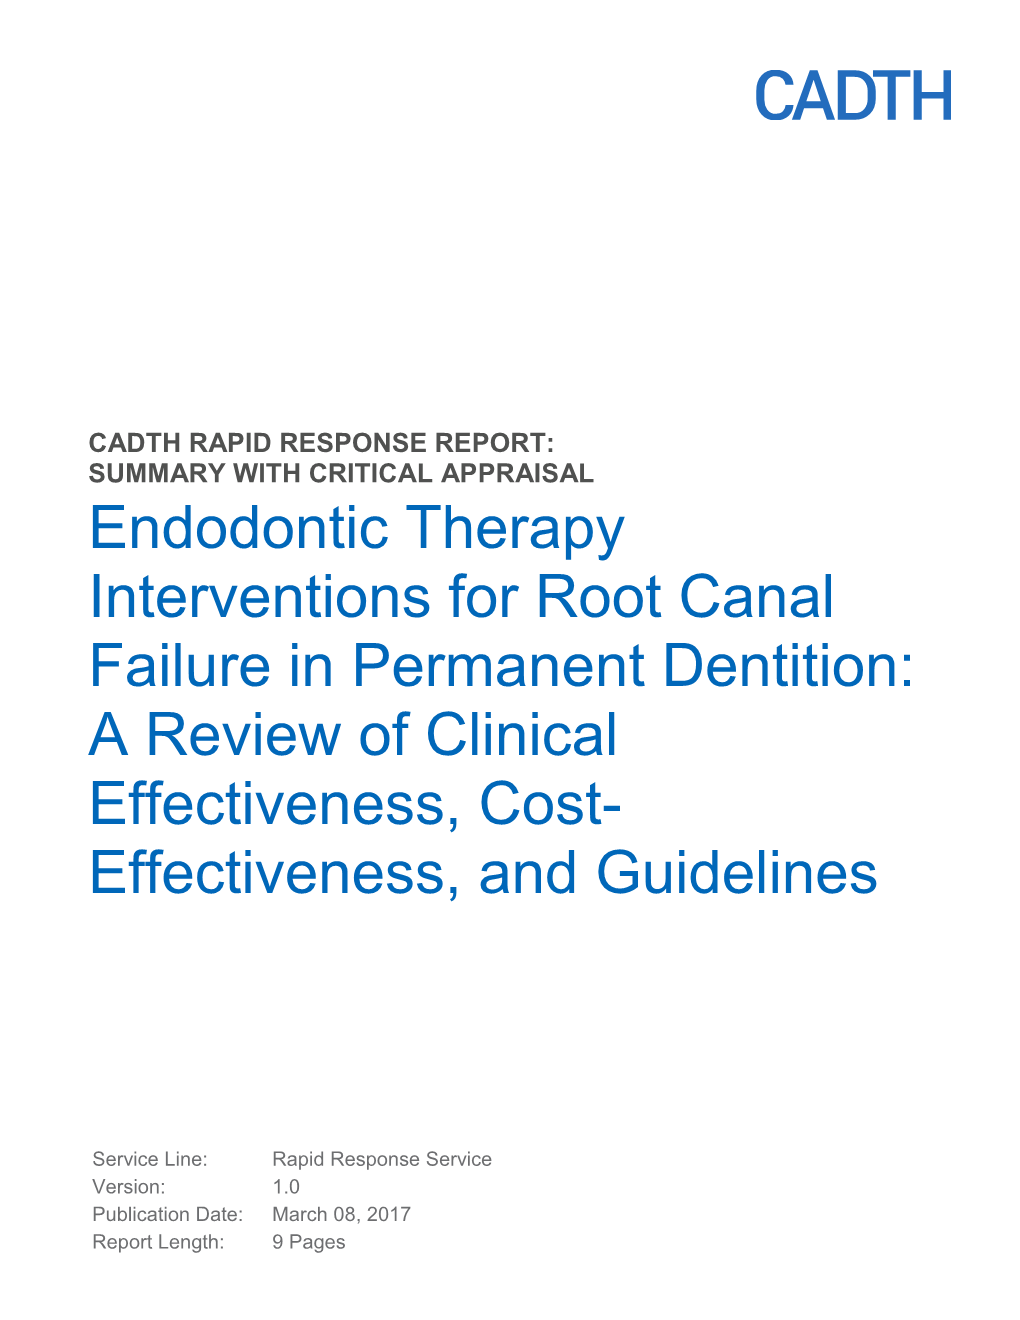 Endodontic Therapy Interventions for Root Canal Failure in Permanent Dentition: a Review of Clinical Effectiveness, Cost- Effectiveness, and Guidelines